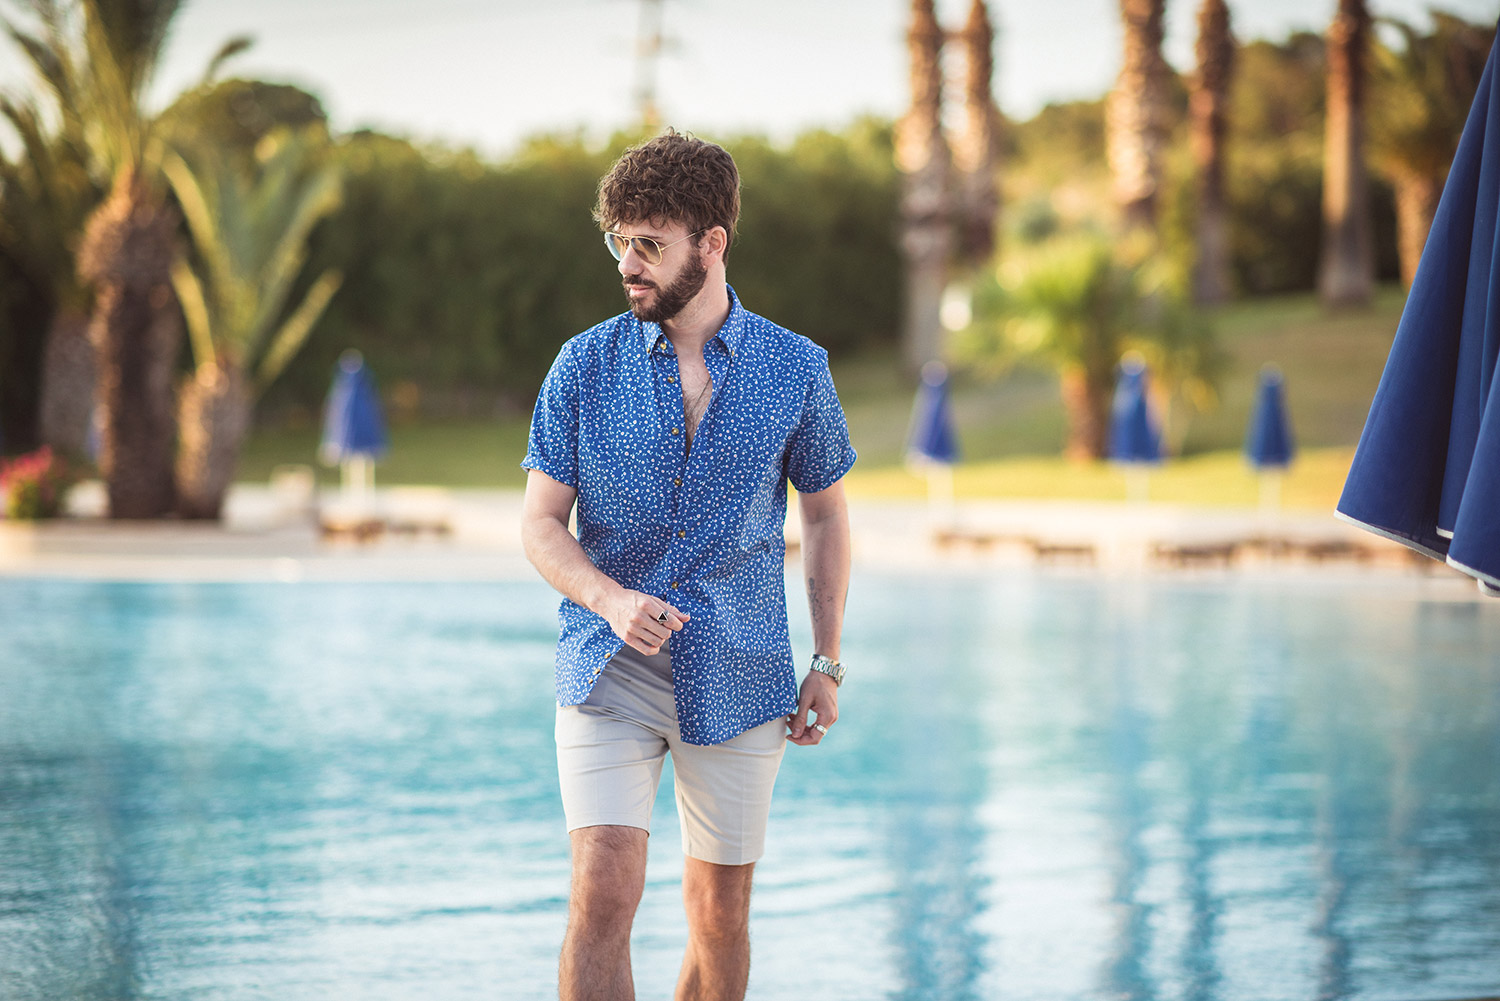 Two Ways To Style A Shirt This Summer With Double Two - Your Average Guy